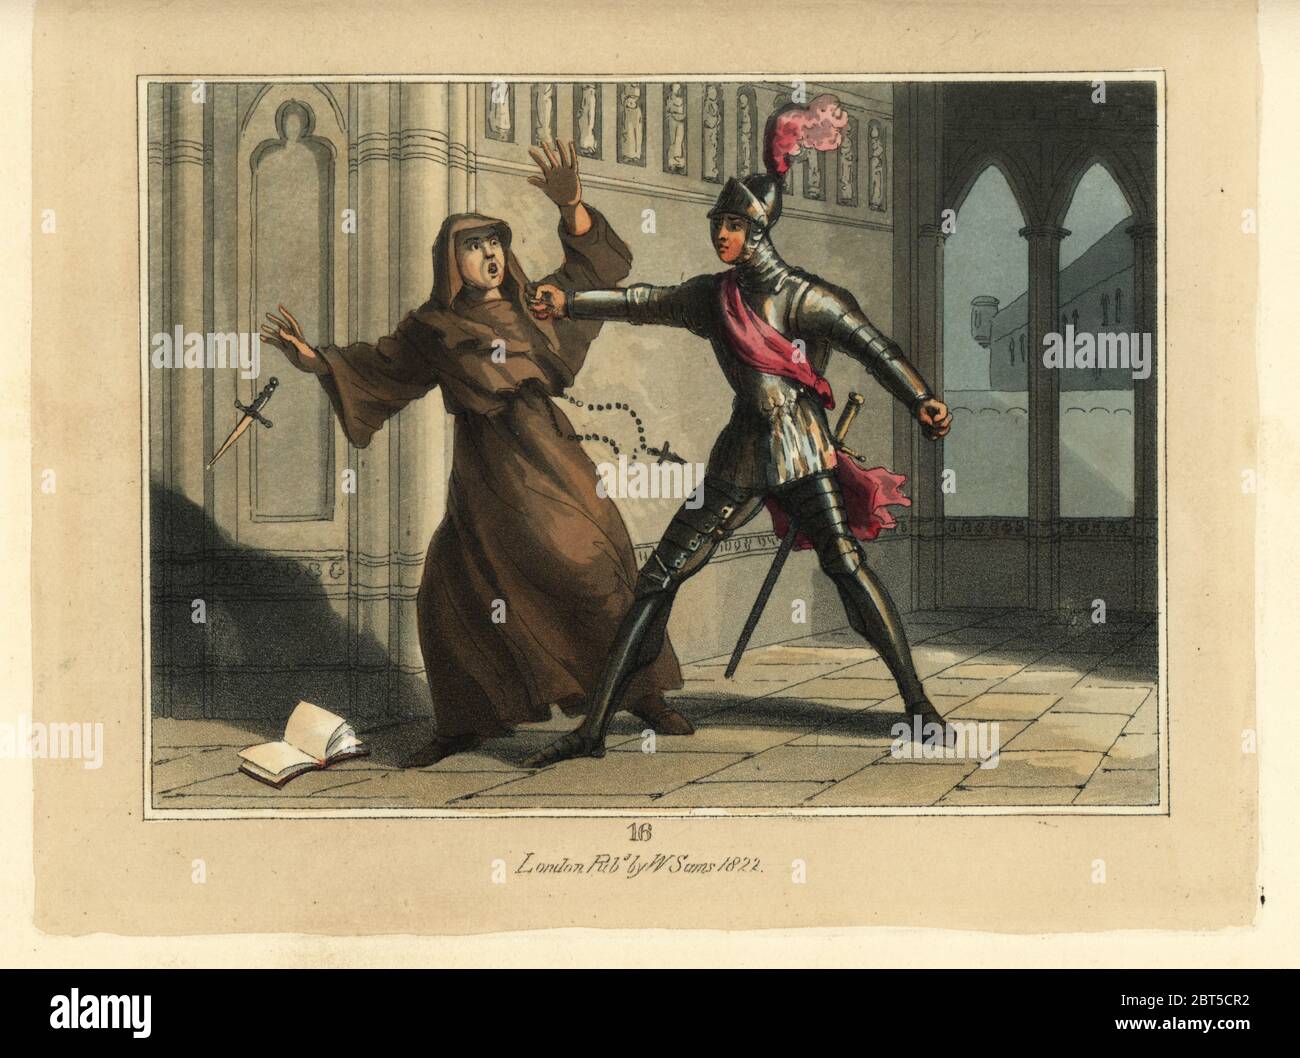 Medieval knight in suit of armour punching a monk with a knife. Sir Ethelbert fighting Alan disguised as a monk. Handcoloured copperplate engraving after an illustration by Thomas Rowlandson from The Tournament, or Days of Chivalry, William Sams, London, 1823. Stock Photo